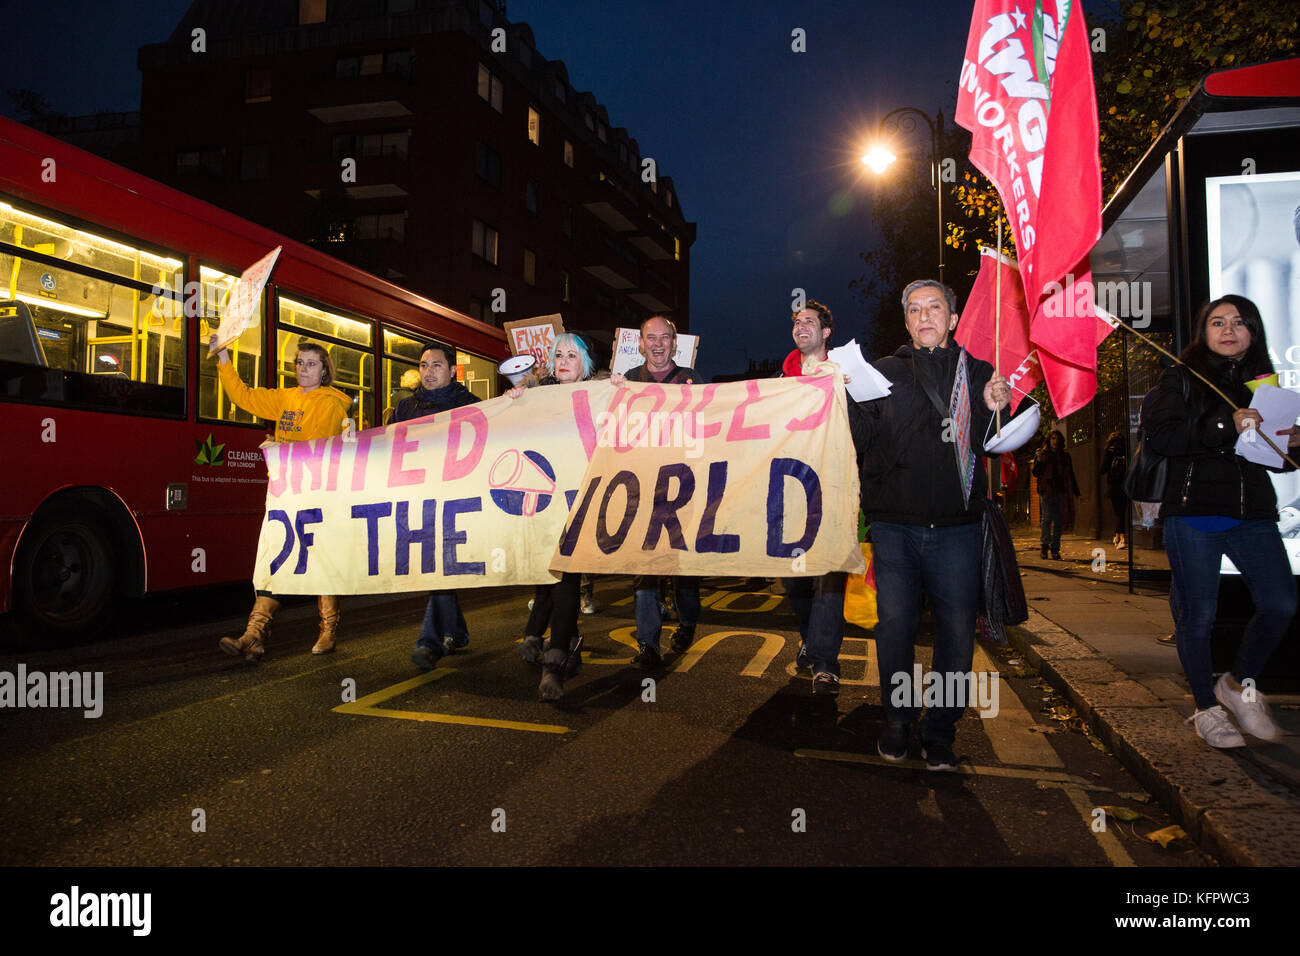 London, UK. 31st Oct, 2017. Supporters of migrant cleaners Angelica Valencia Bolanos and Fredy Lopez, suspended without pay by contractor Templewood Cleaning for having joined trade union United Voices of the World and for having voted to strike for the London Living Wage, protest in the streets around luxury car dealer H.R. Owen's Ferrari showroom in South Kensington. The cleaners, a married couple, are the only cleaners responsible for cleaning H.R. Owen's Ferrari showroom via contractor Templewood Cleaning. Credit: Mark Kerrison/Alamy Live News Stock Photo